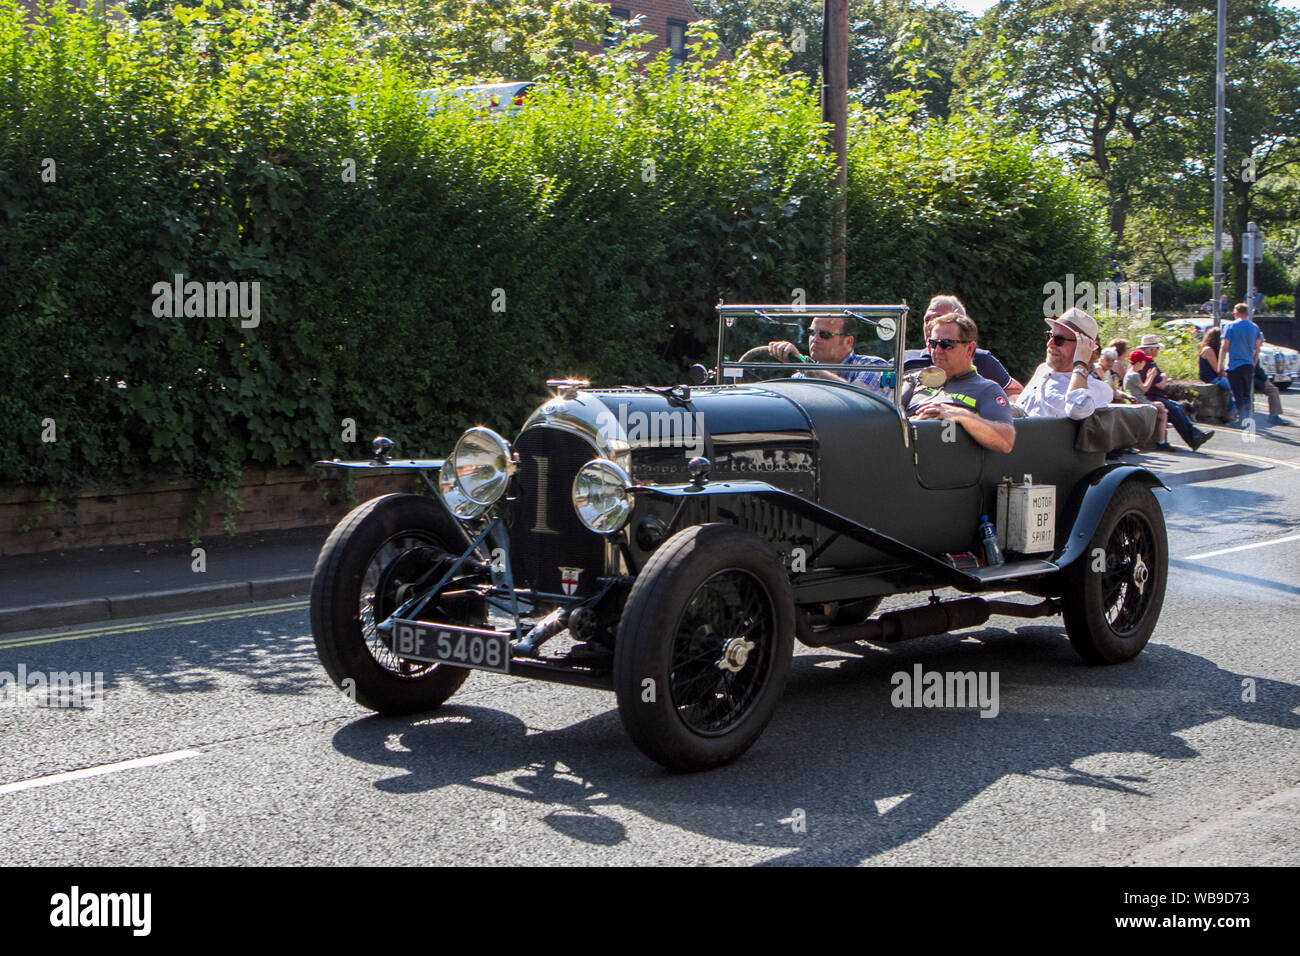 BF5408 Bentley open topped classic vintage car at the Ormskirk Motorfest in Lancashire, UK Stock Photo